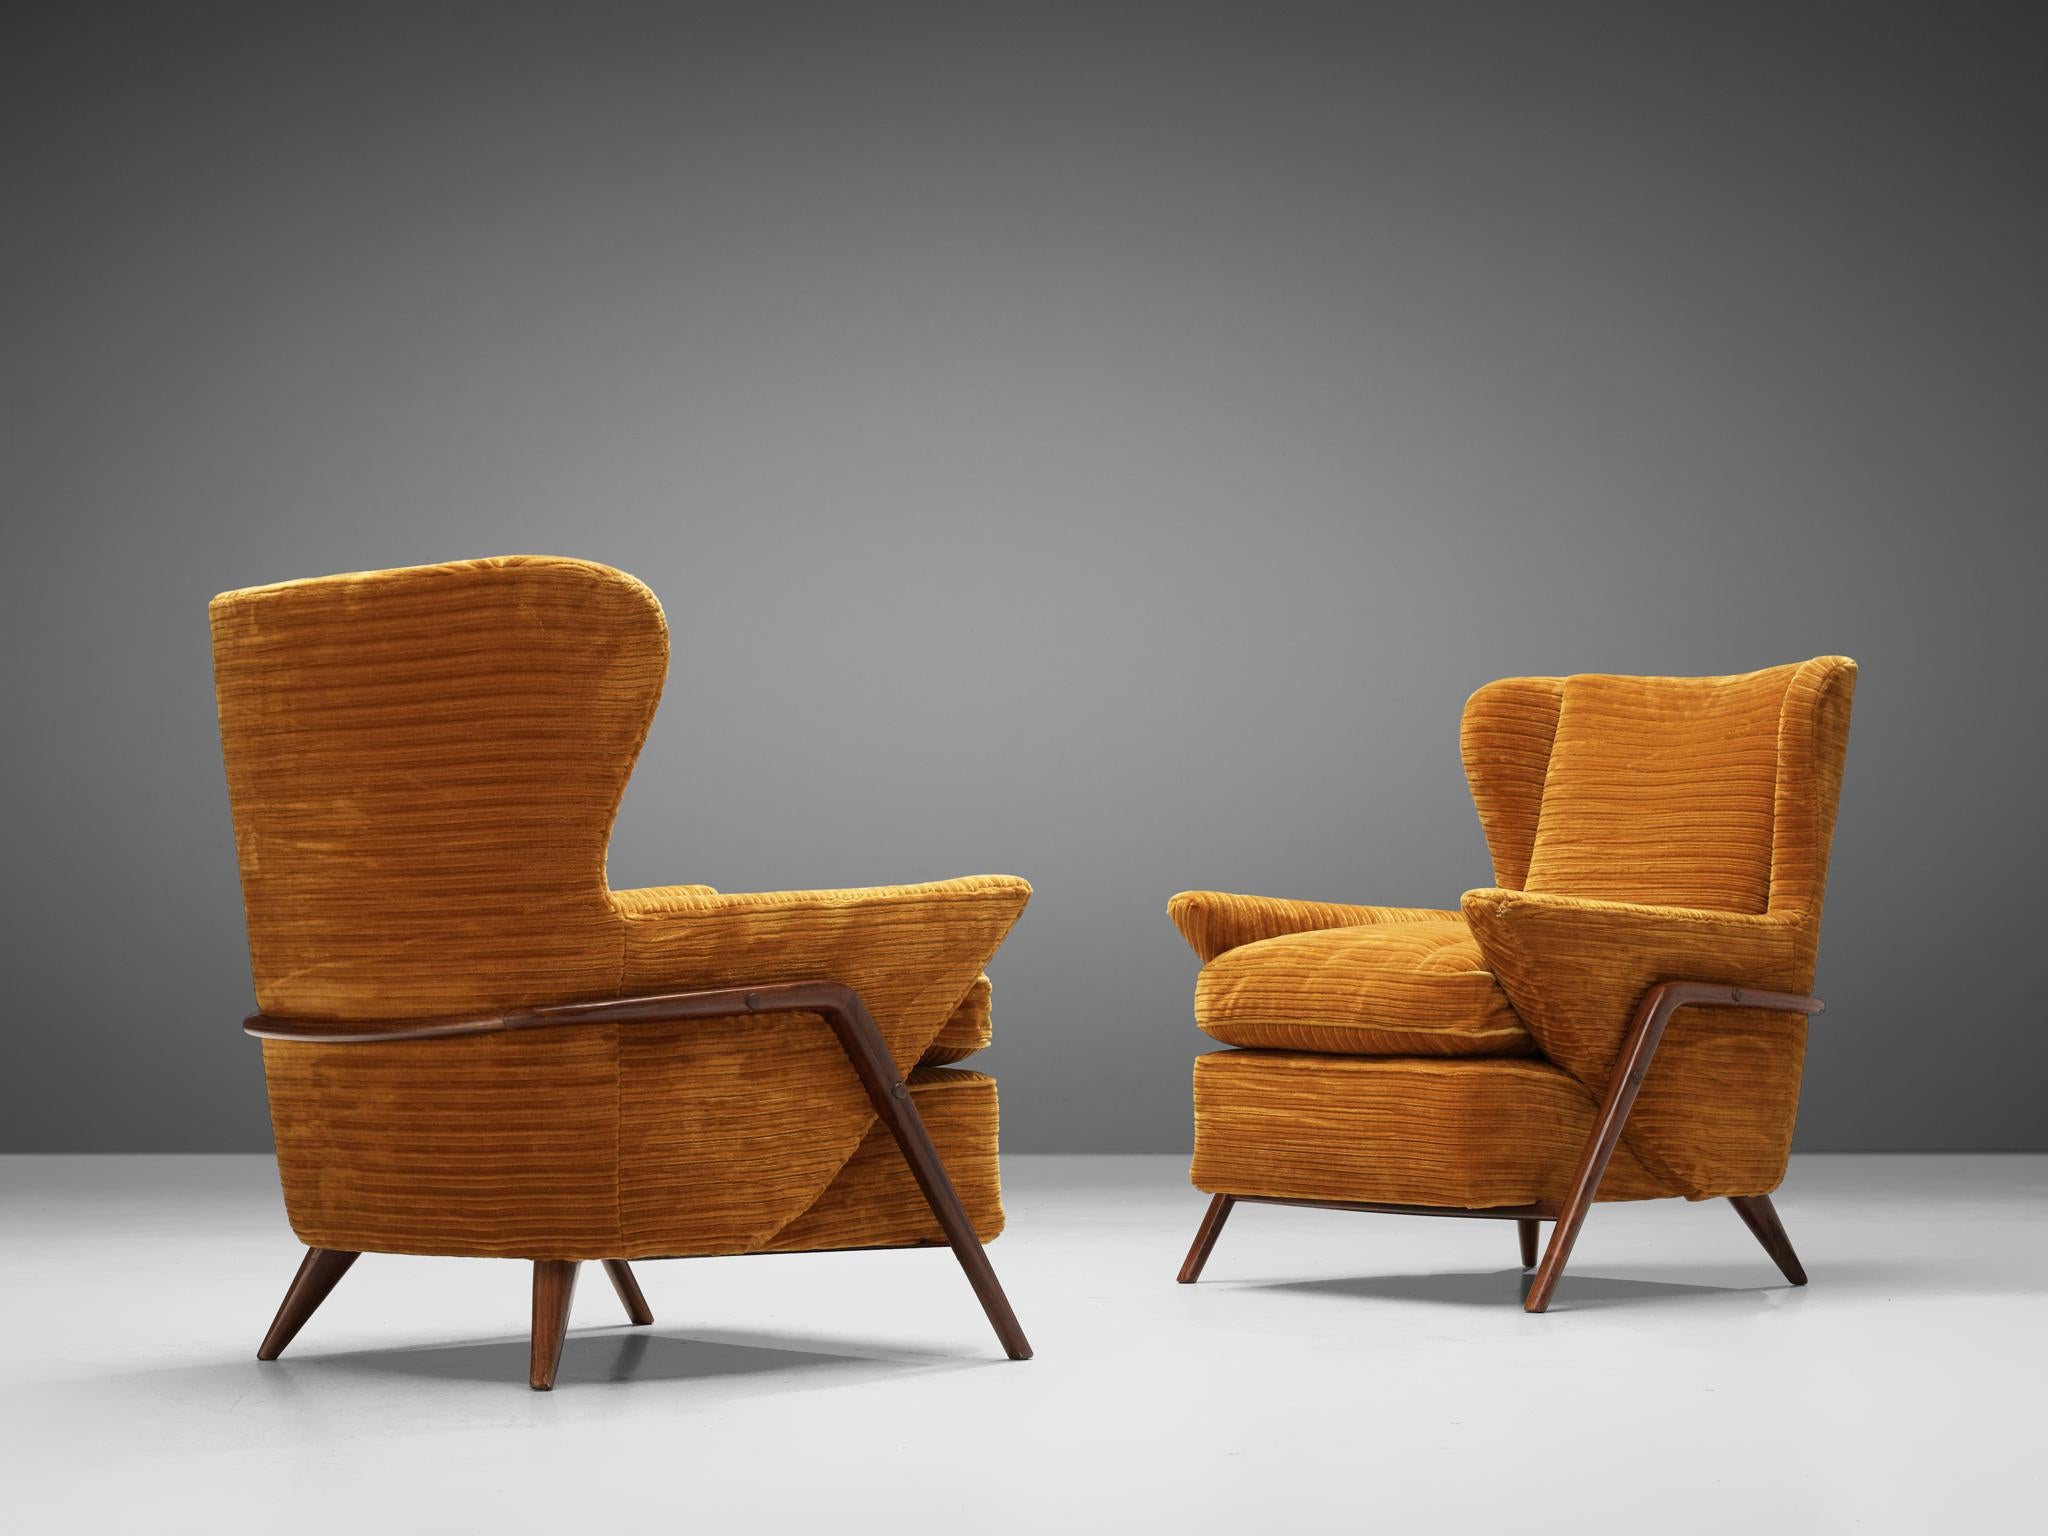 Pair of armchairs, textured ochre yellow upholstery, Italy, 1960s.

Pair of Italian wingback armchairs in textured ochre yellow upholstery. Remarkable about this pair of armchairs is their extravagant shape. The high backrest is joined by